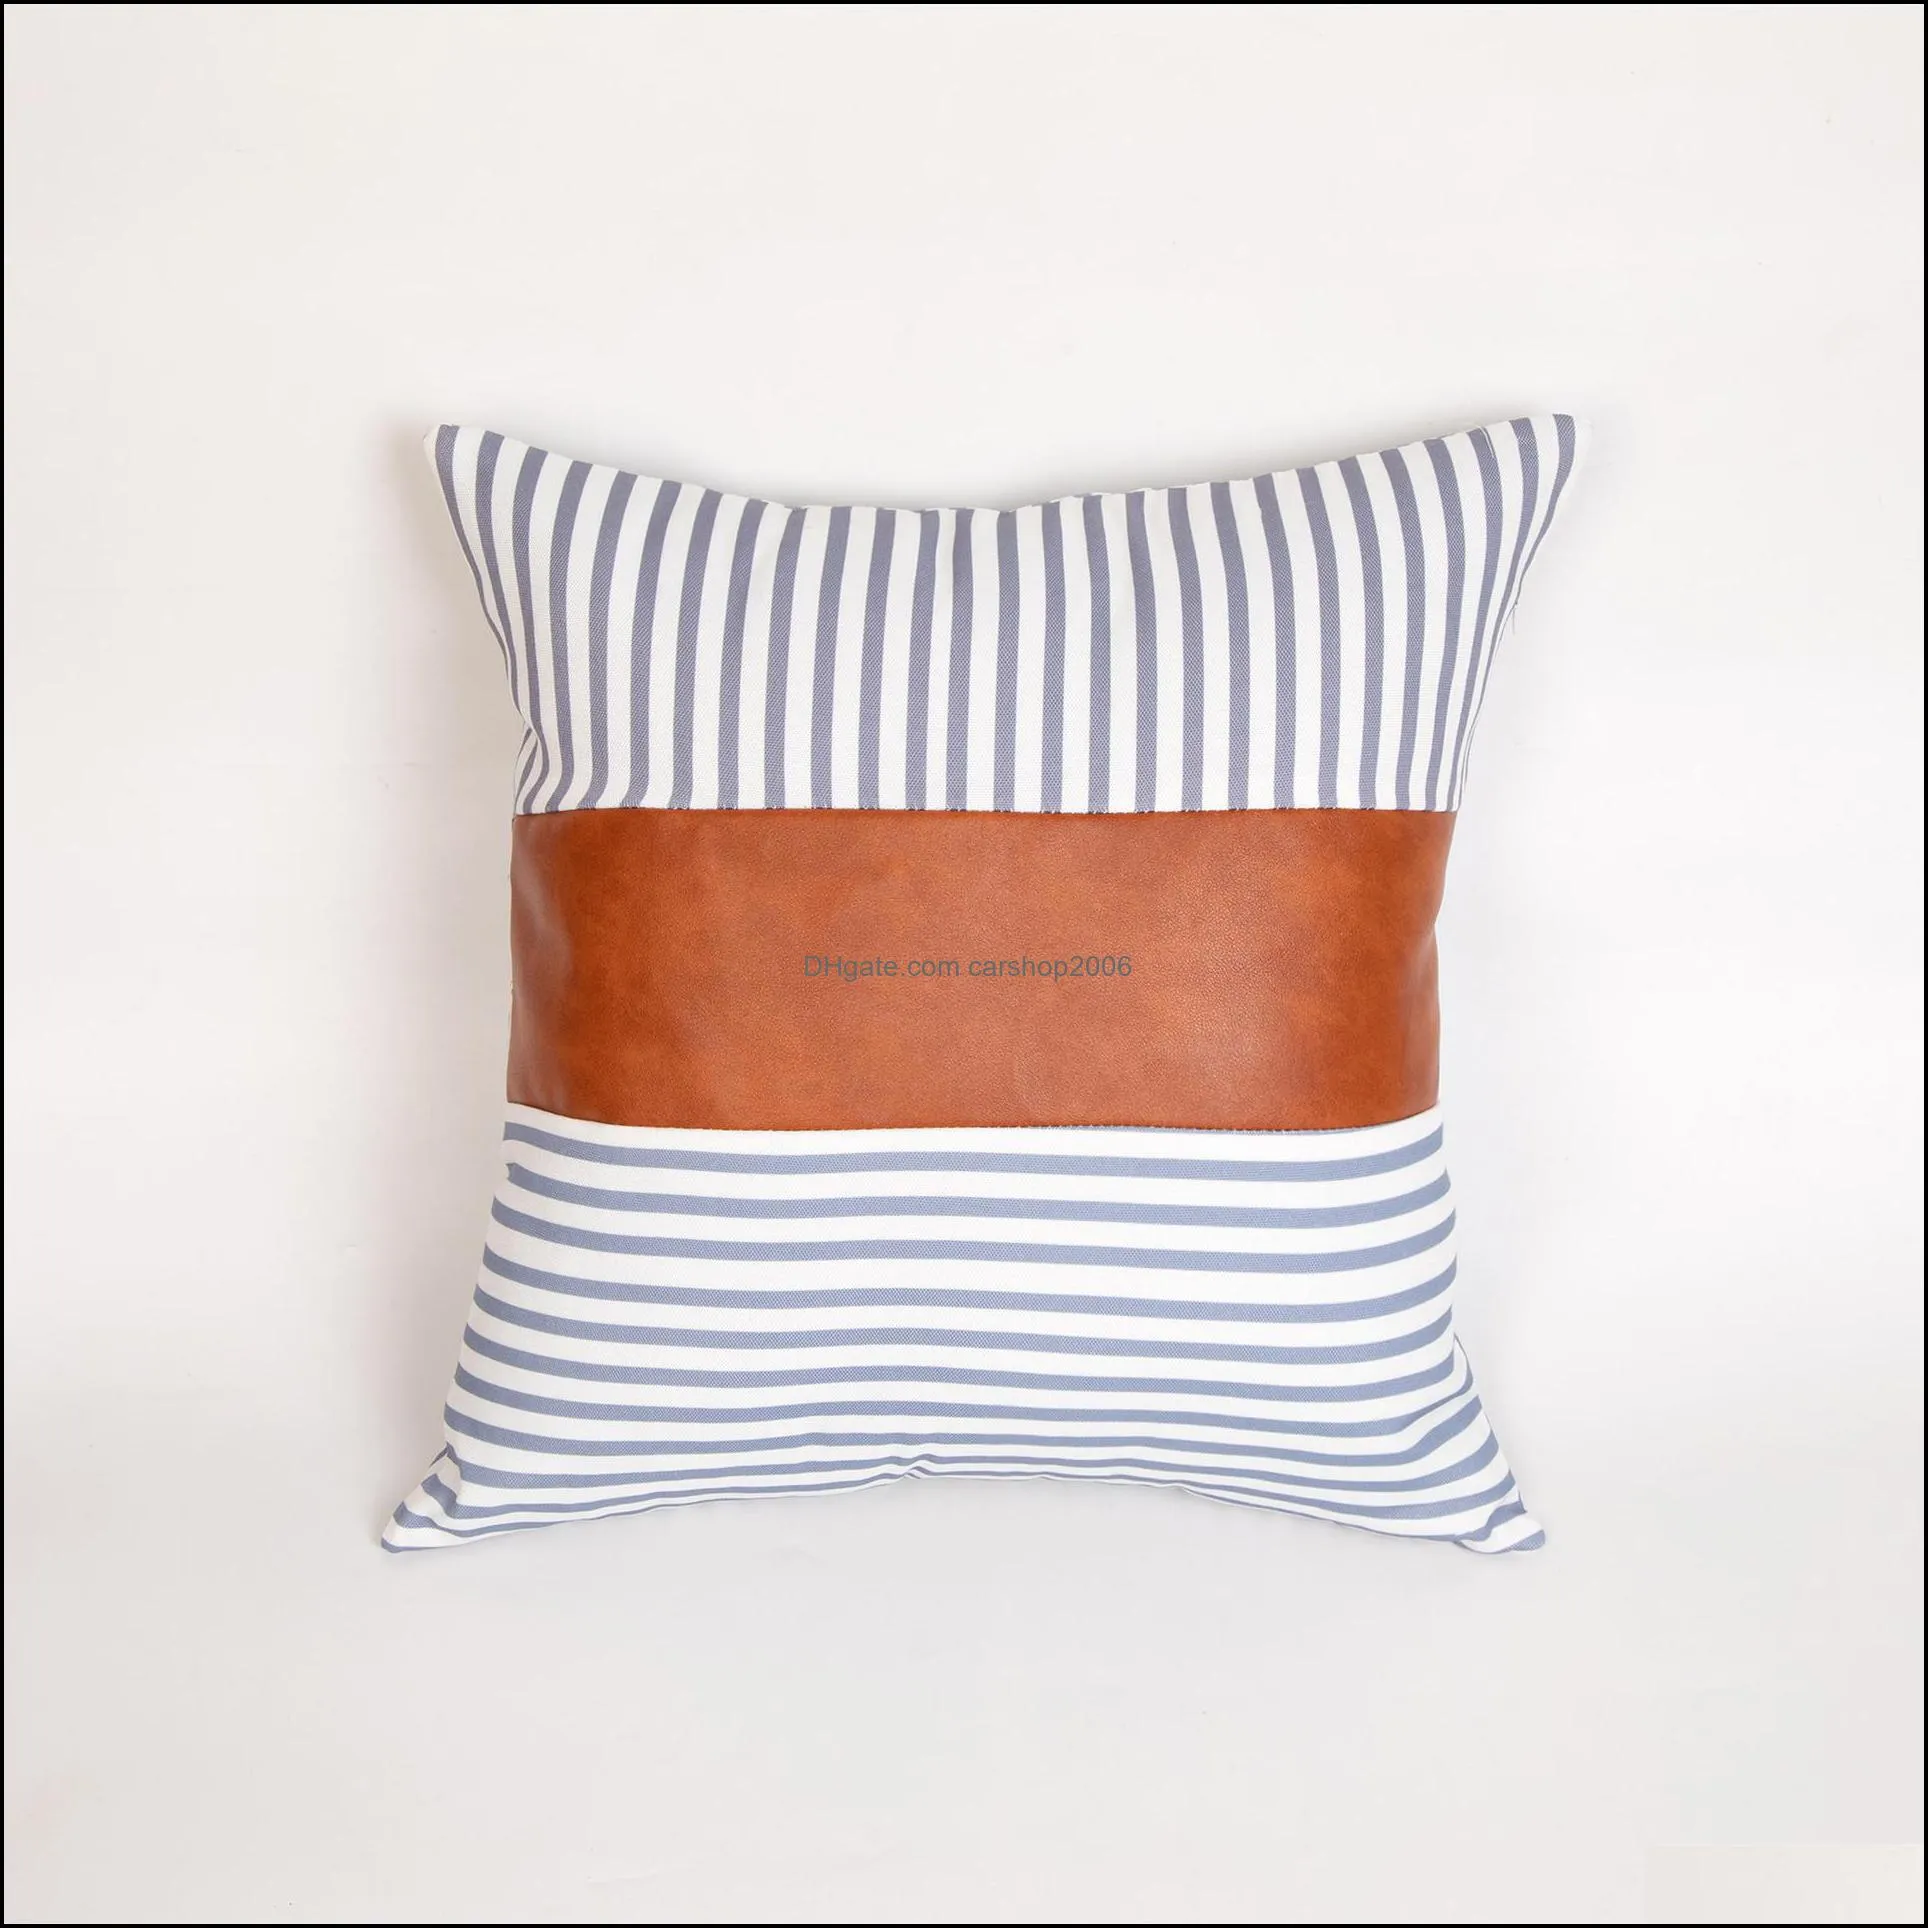 Fashion Stripe PU Pillow Cover 18x18Inch Soft Leather Canvas Patchwork Pillowcase Sofa Cushion Cover Home Decorative Pillow Cover DBC